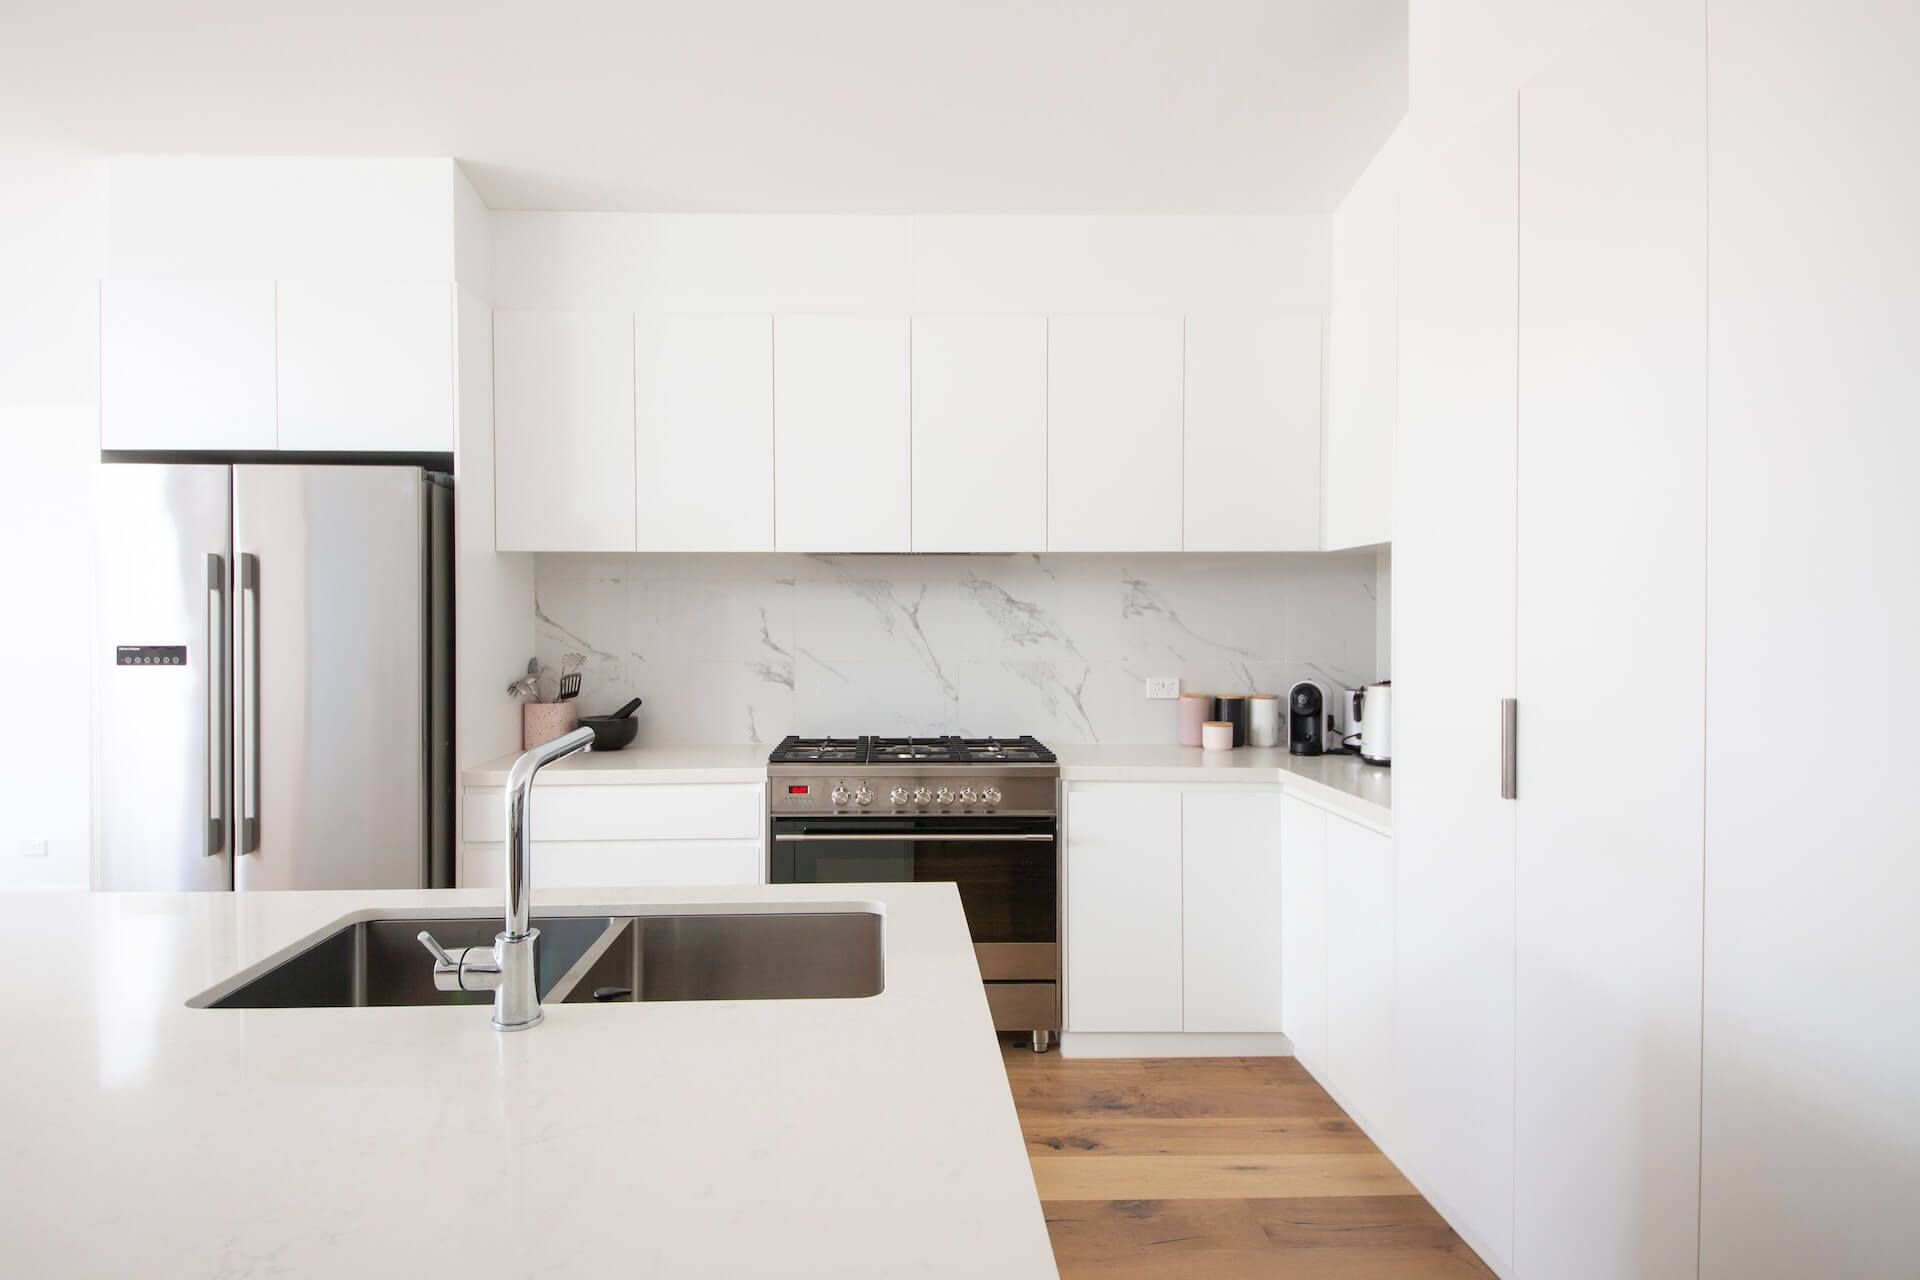 White kitchens without a splash of color feel bland and outdated